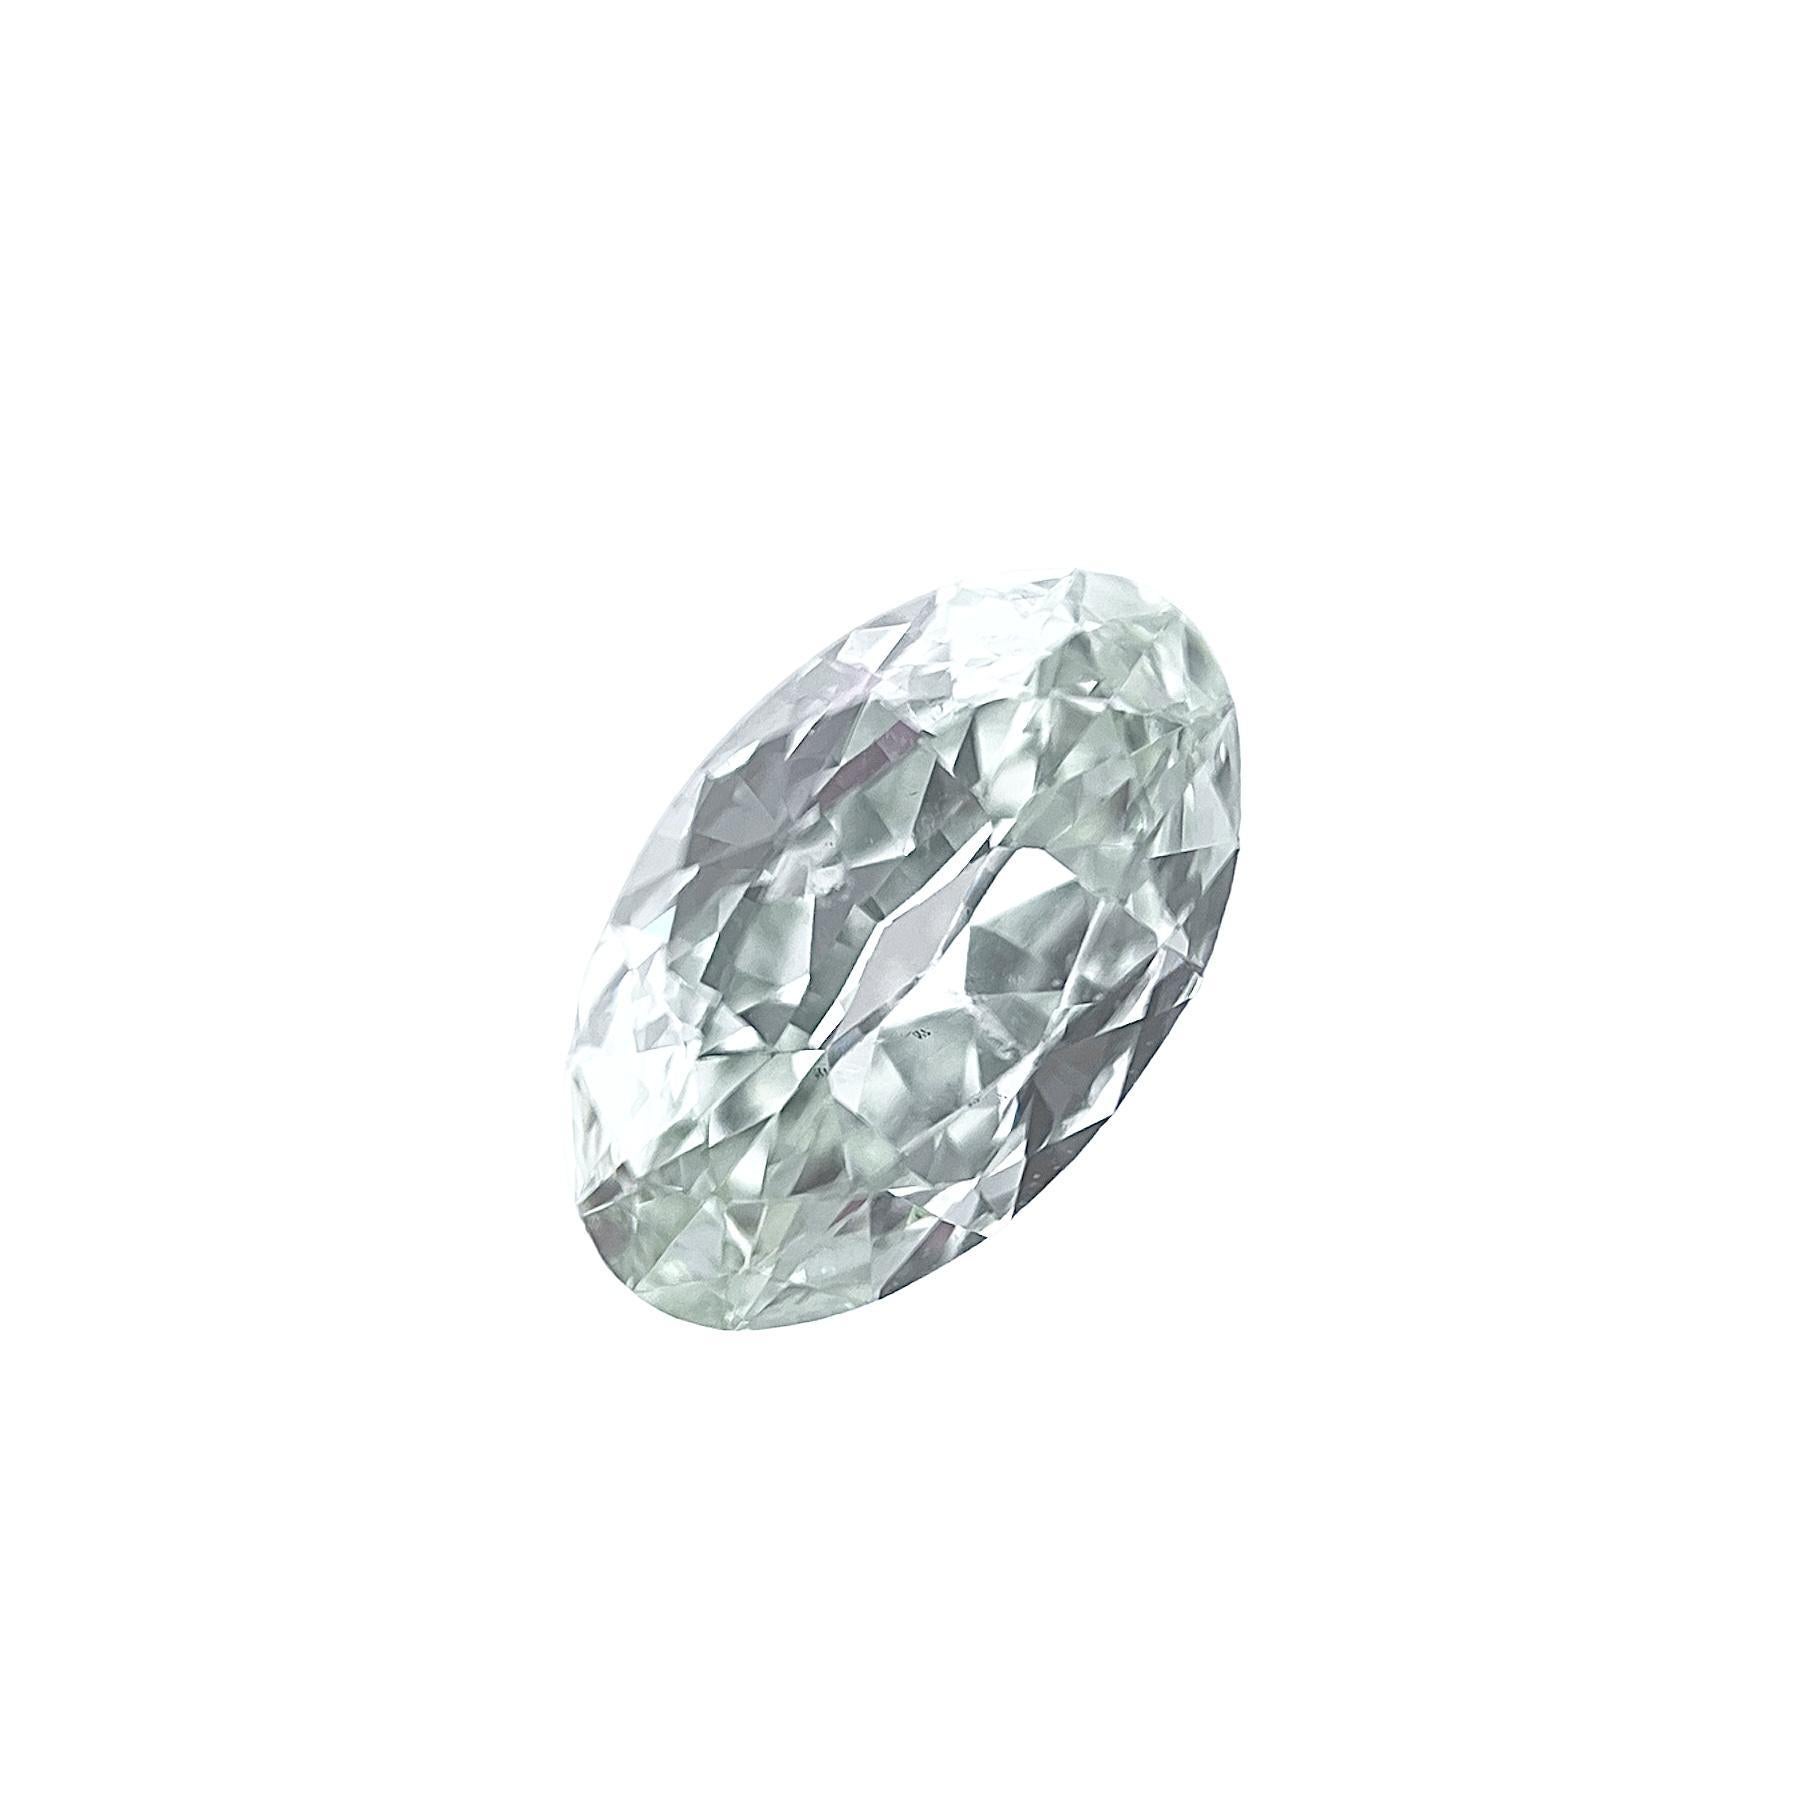 ITEM DESCRIPTION

ID #: NYC57471
Stone Shape: Moval
Diamond Weight: 1.01 carat
Clarity: VS2
Color: L	
Cut:	Excellent
Measurements: 8.75 x5.44 x 2.71 mm
Depth %: 49.70%
Table %: 	59%
Symmetry: Very
Polish: Very Good
Fluorescence: None
Certifying Lab: